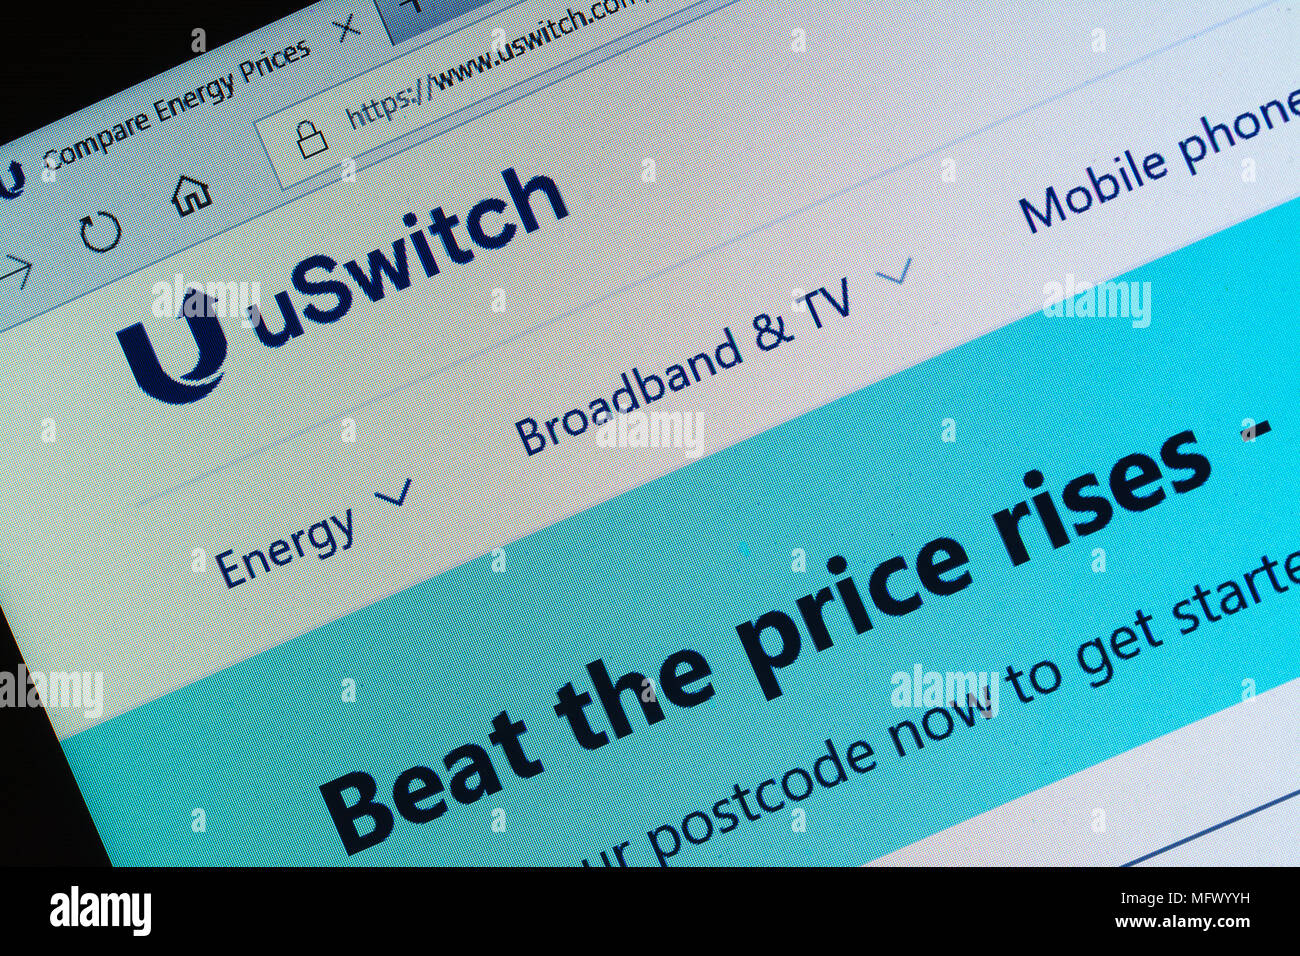 U Switch comparison website for comparing prices for energy and other utilities and for switching companies - screenshot Stock Photo